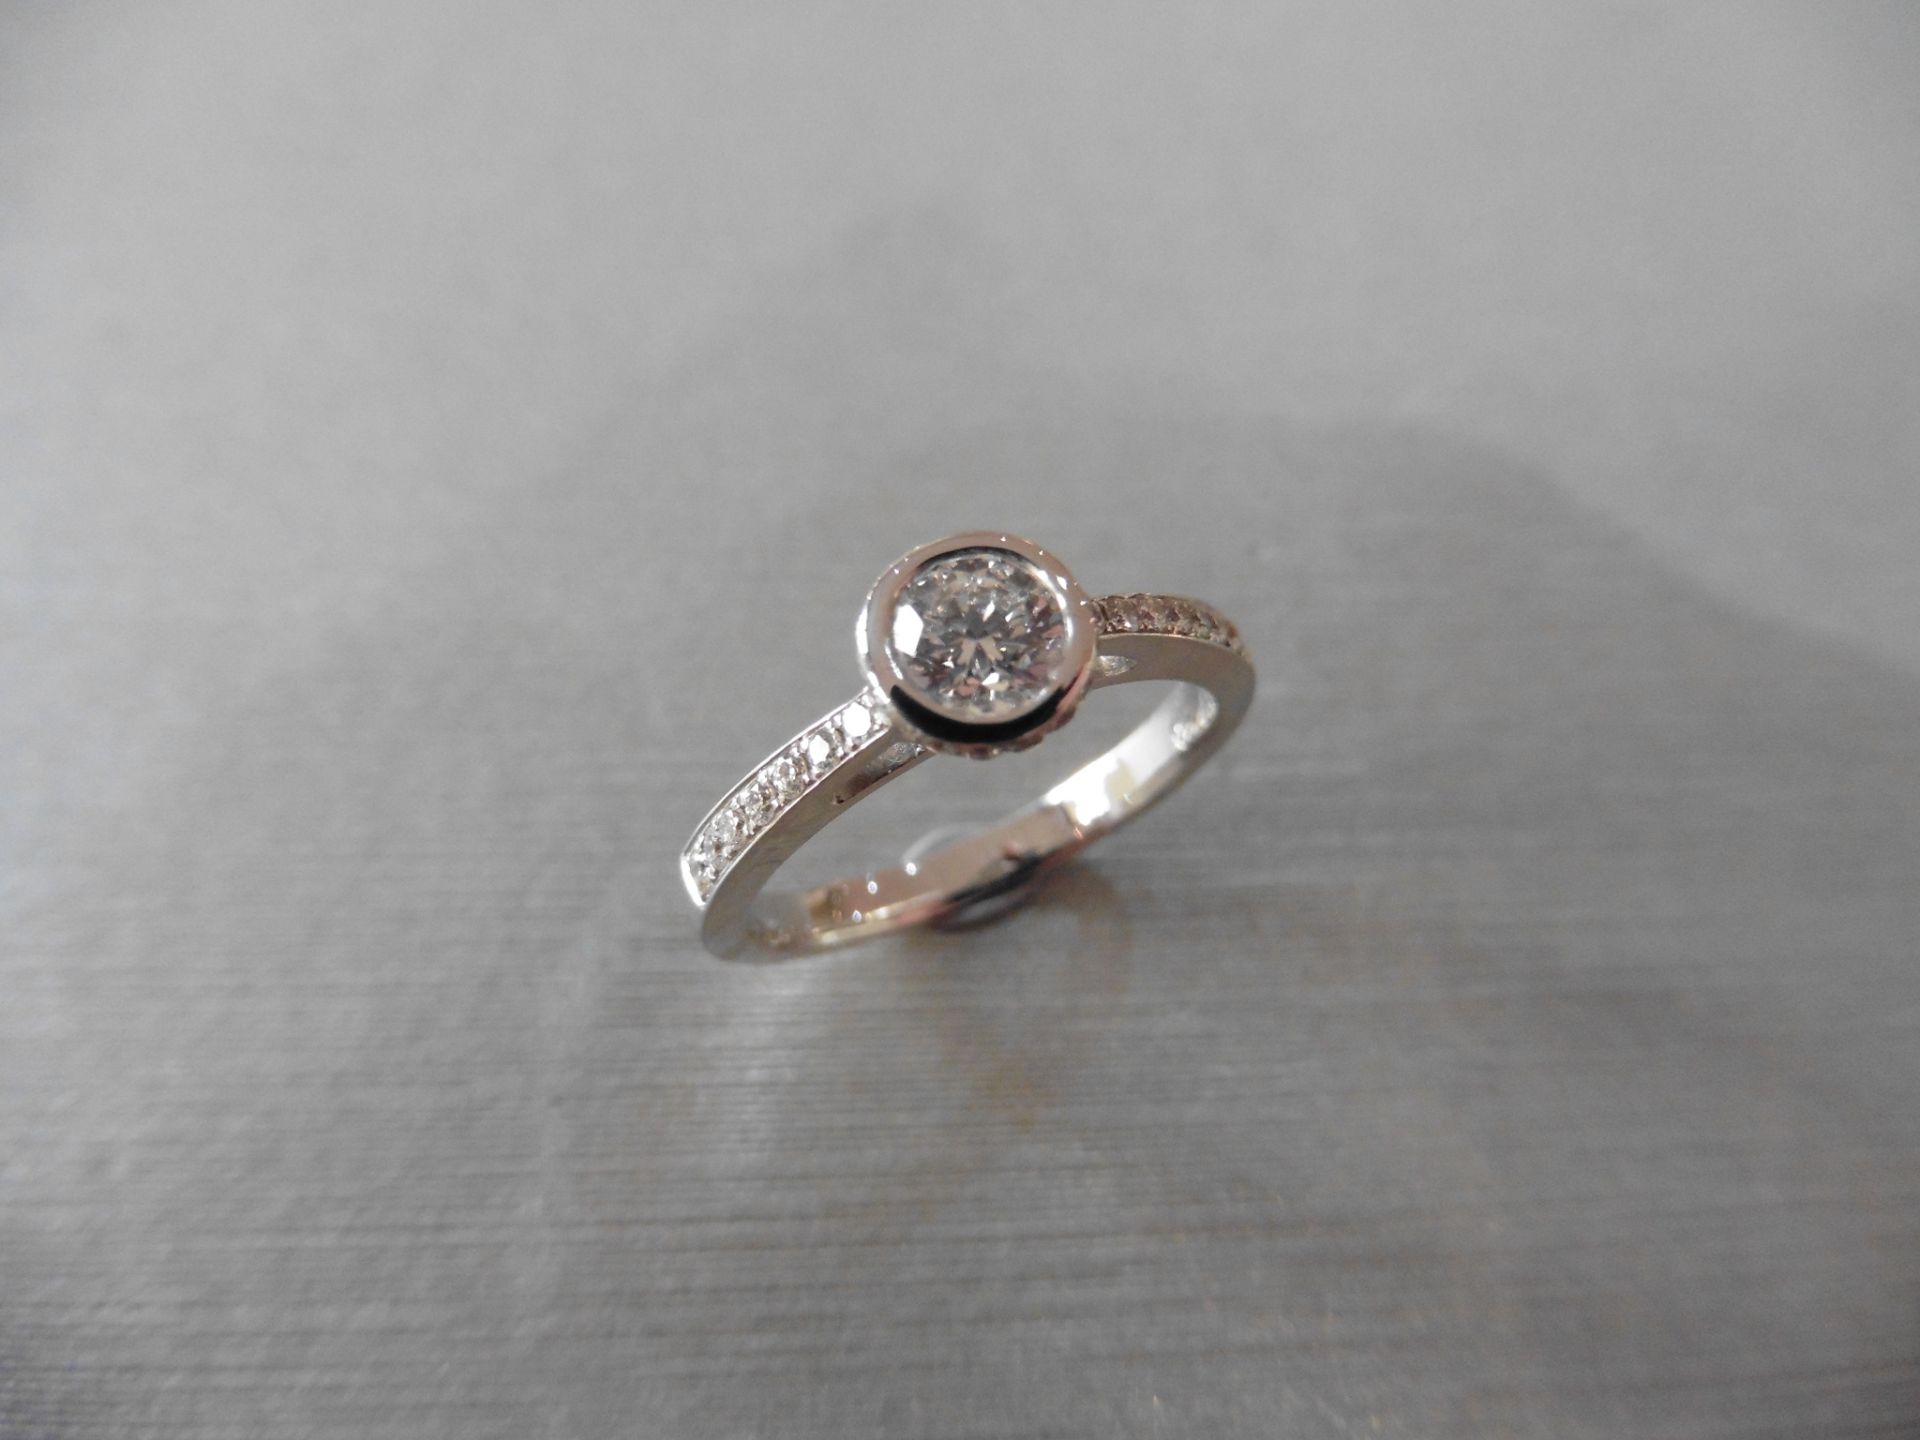 18ct white gold diamond set solitaire ring with a Brilliant cut diamond weighing 0.41ct secured in a - Image 4 of 4